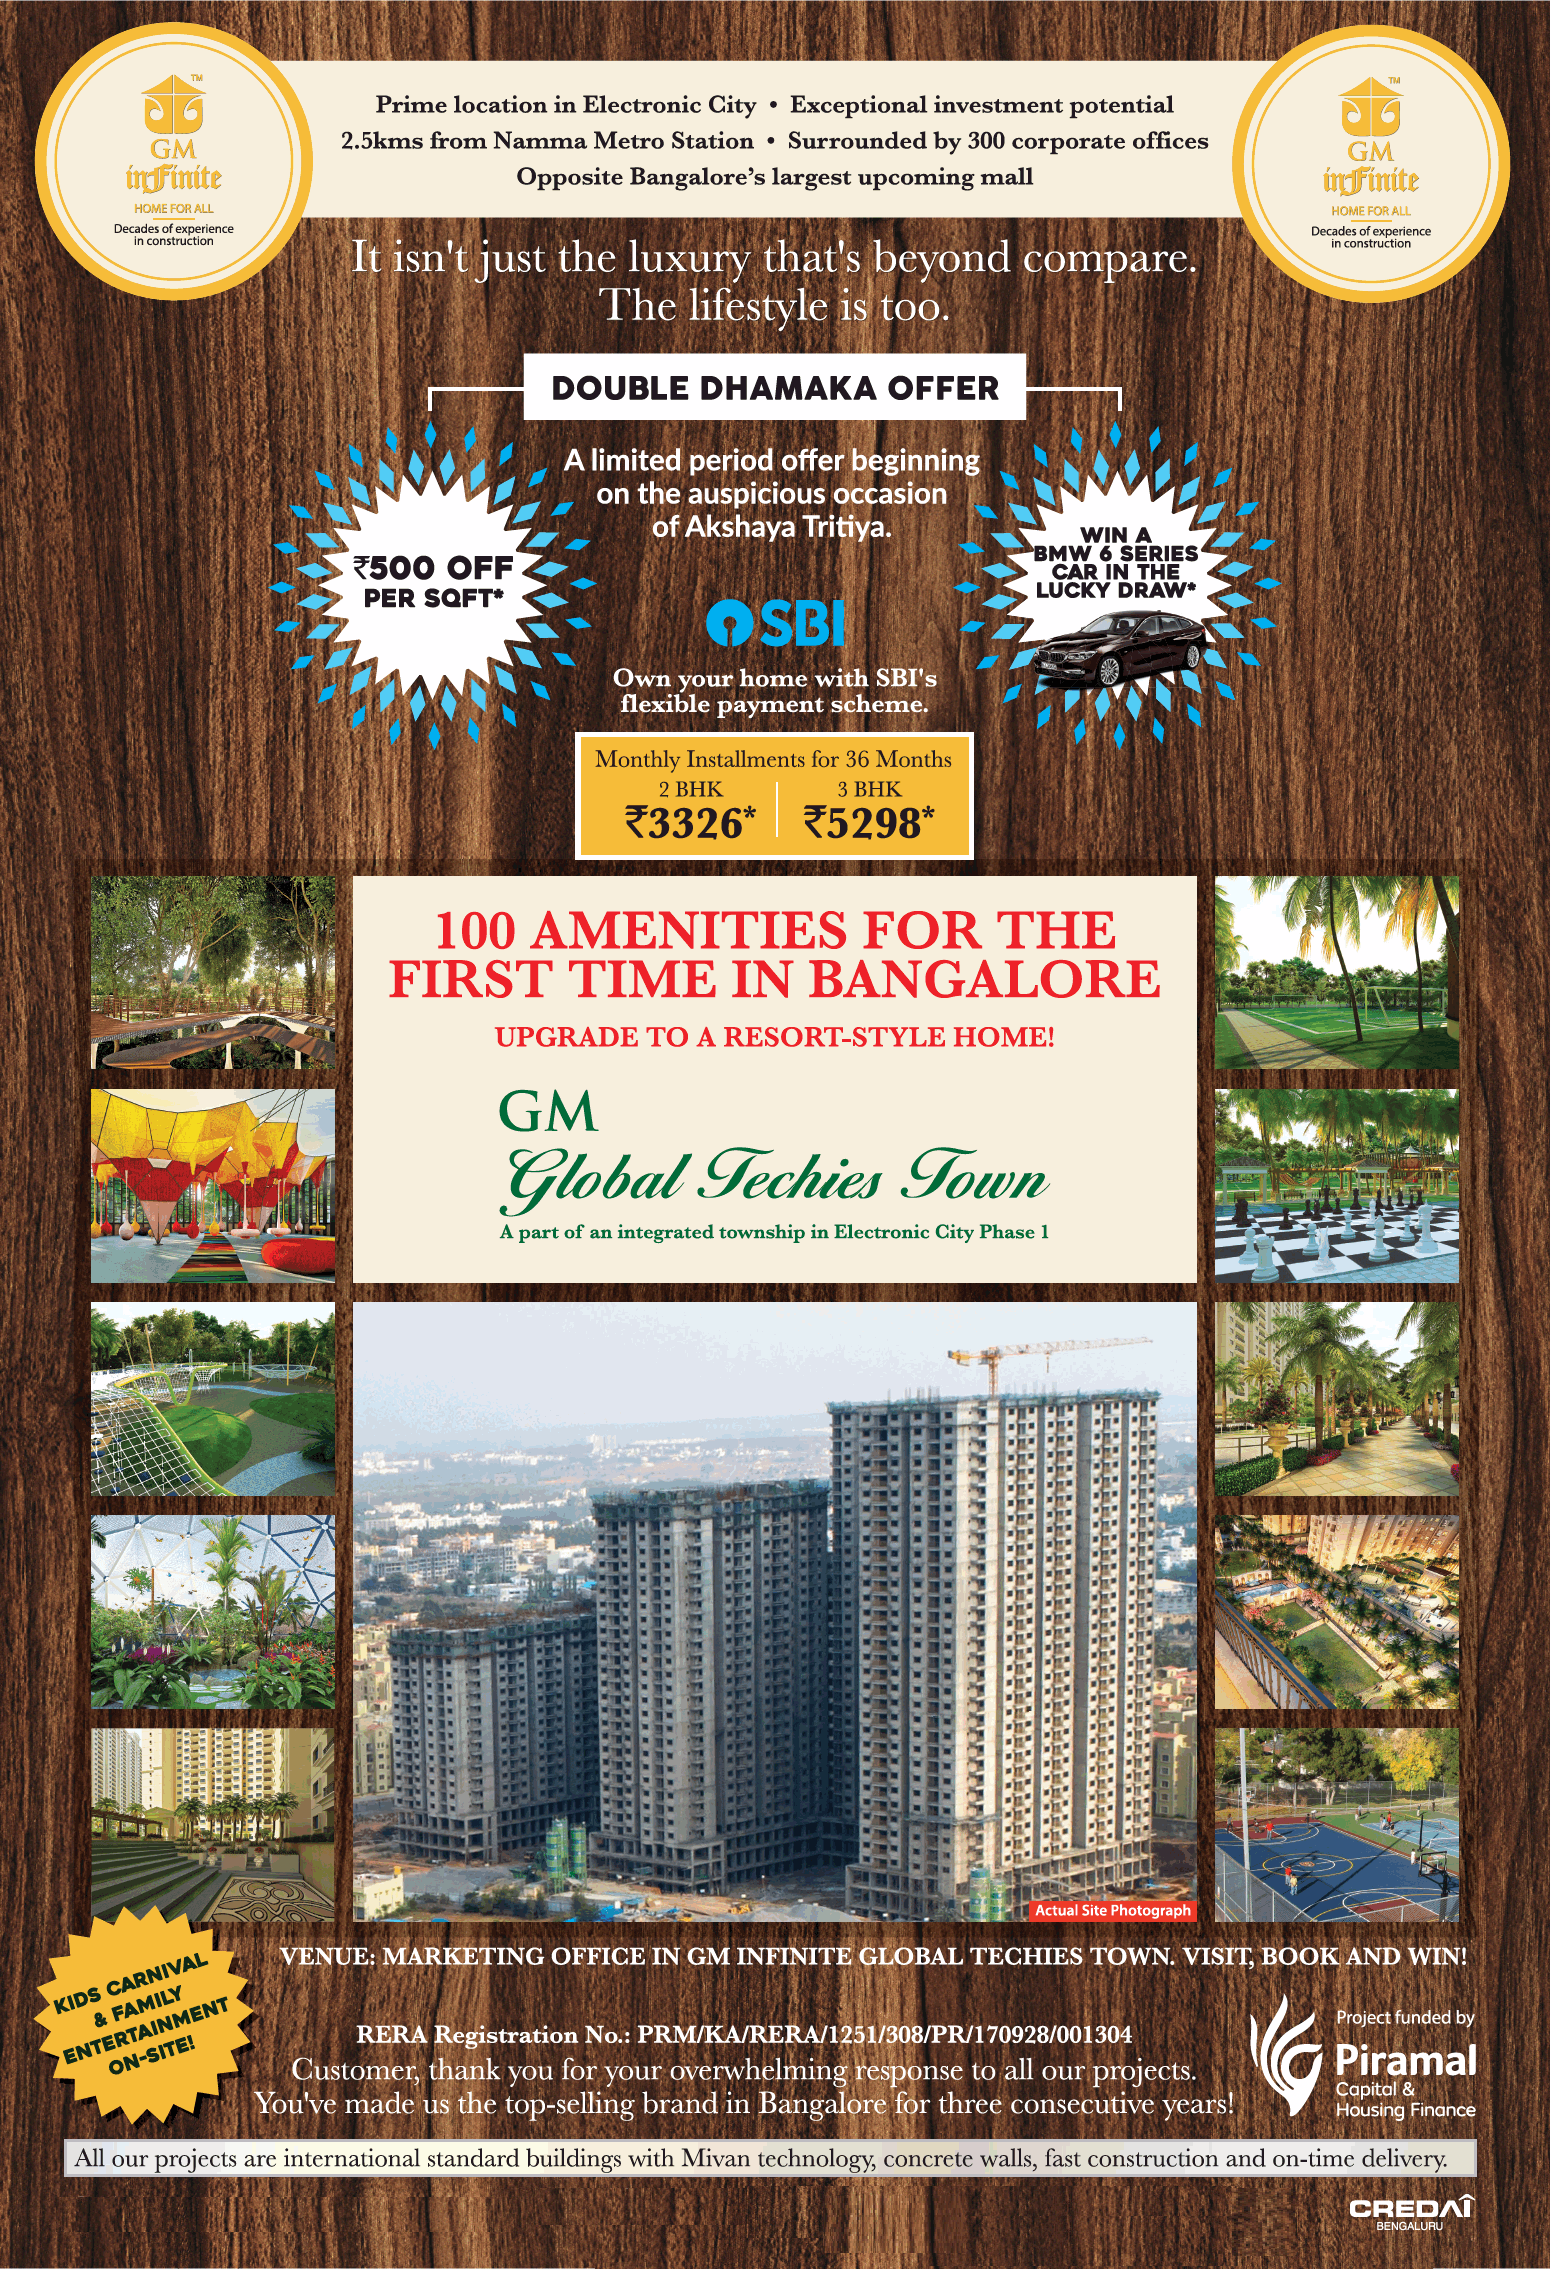 Own your home with SBI's flexible payment scheme at GM Global Techies Town in Bangalore Update